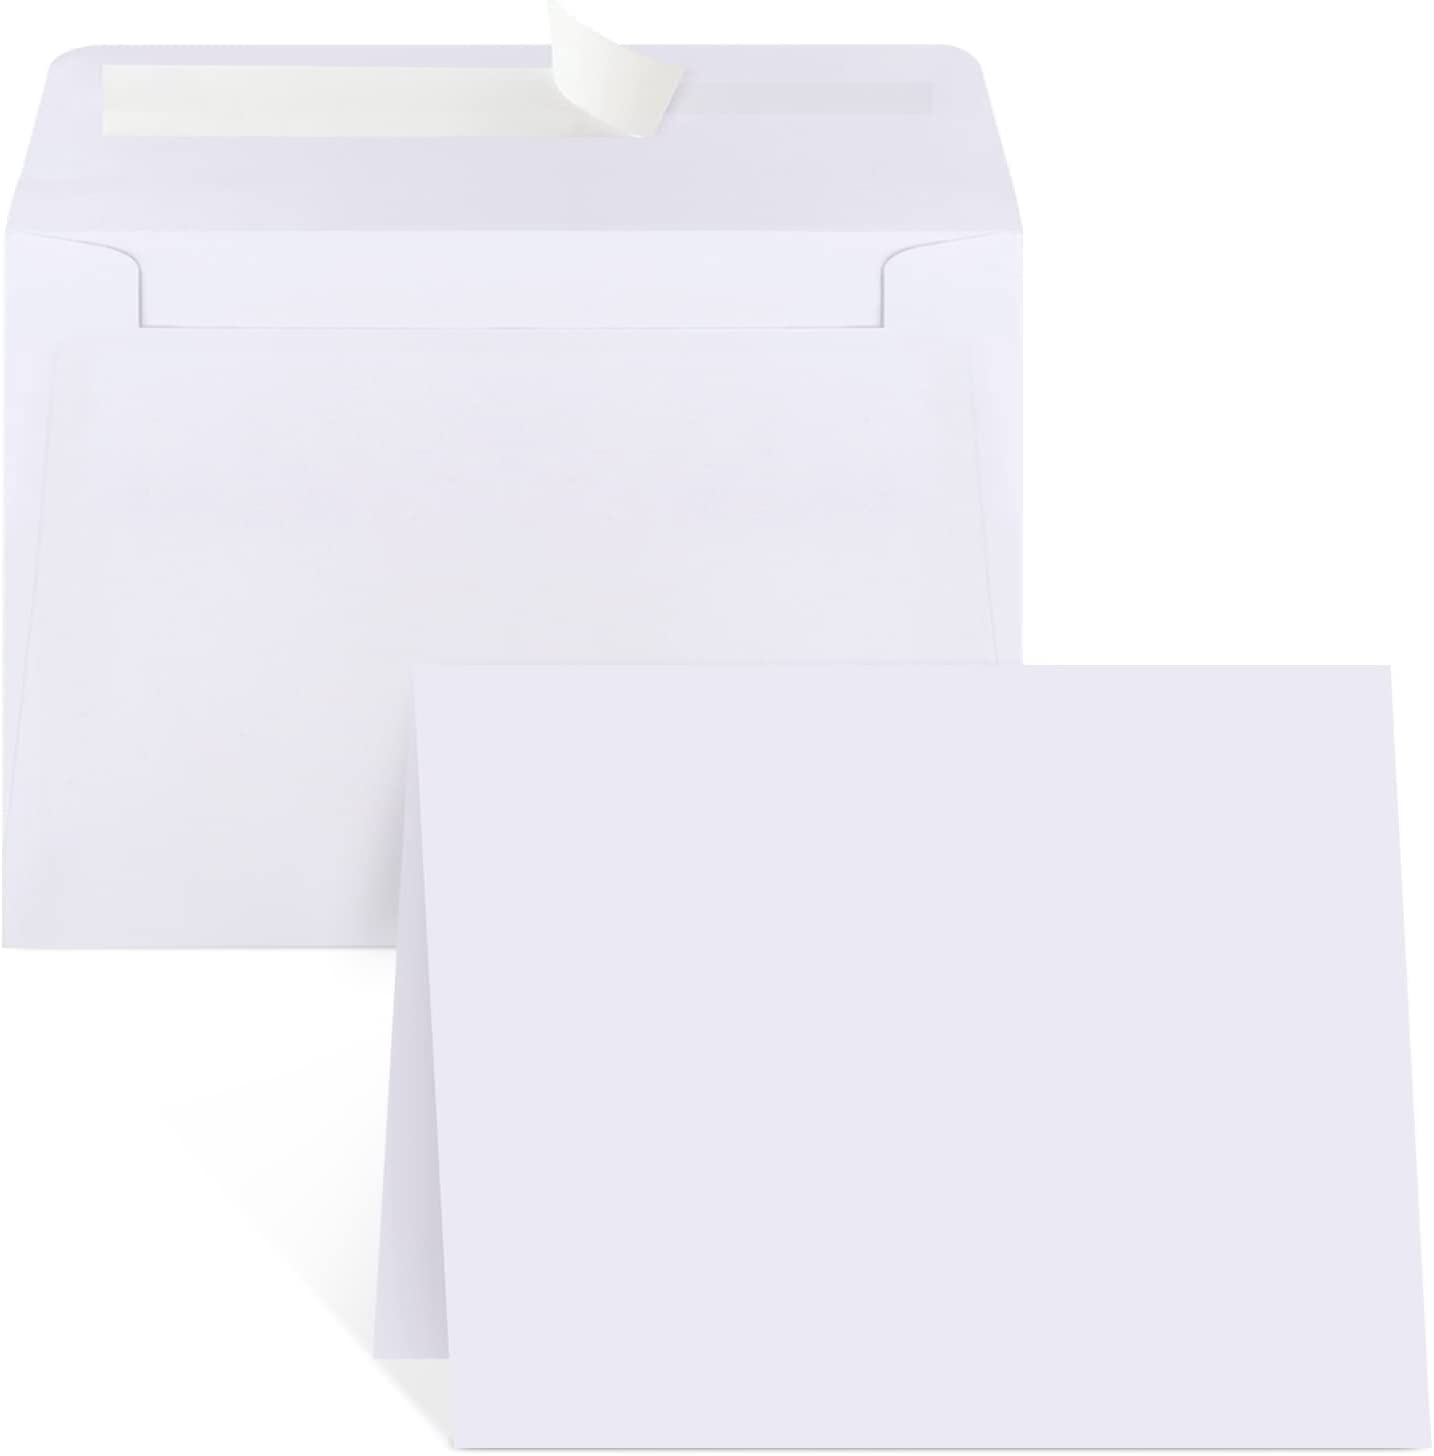 Hamilco Blank Greeting Cards 5x7 Folded Cream Card stock 80 lb Cover 100  Pack 